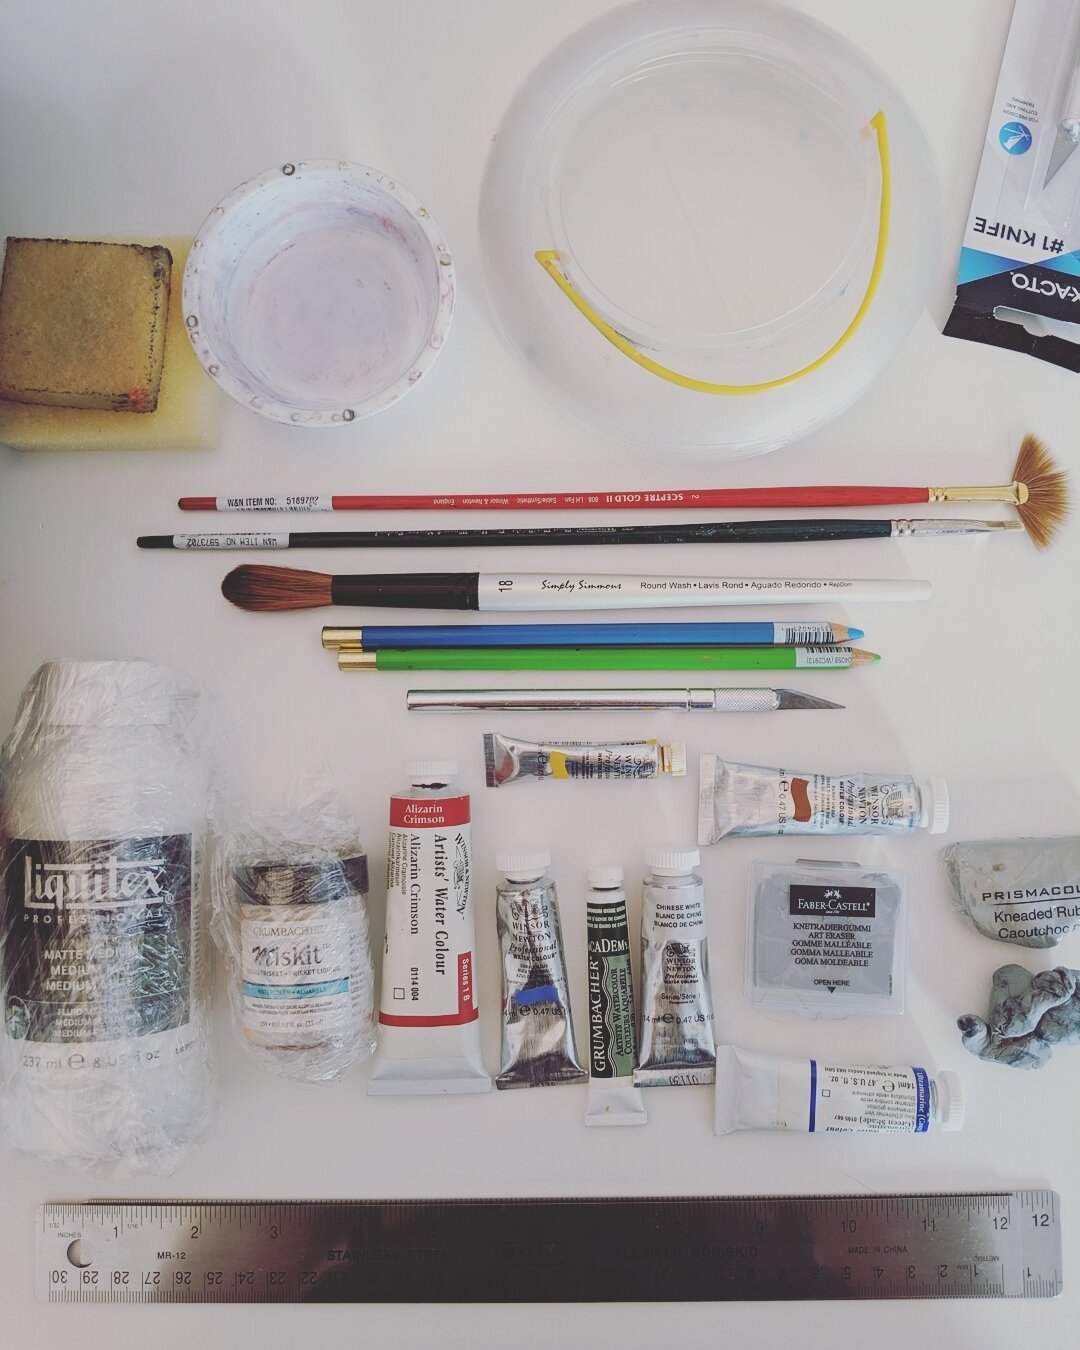 Inventory first. 
#newprojects #freshstart #watercolor #preparation #artmaterials #moretocome